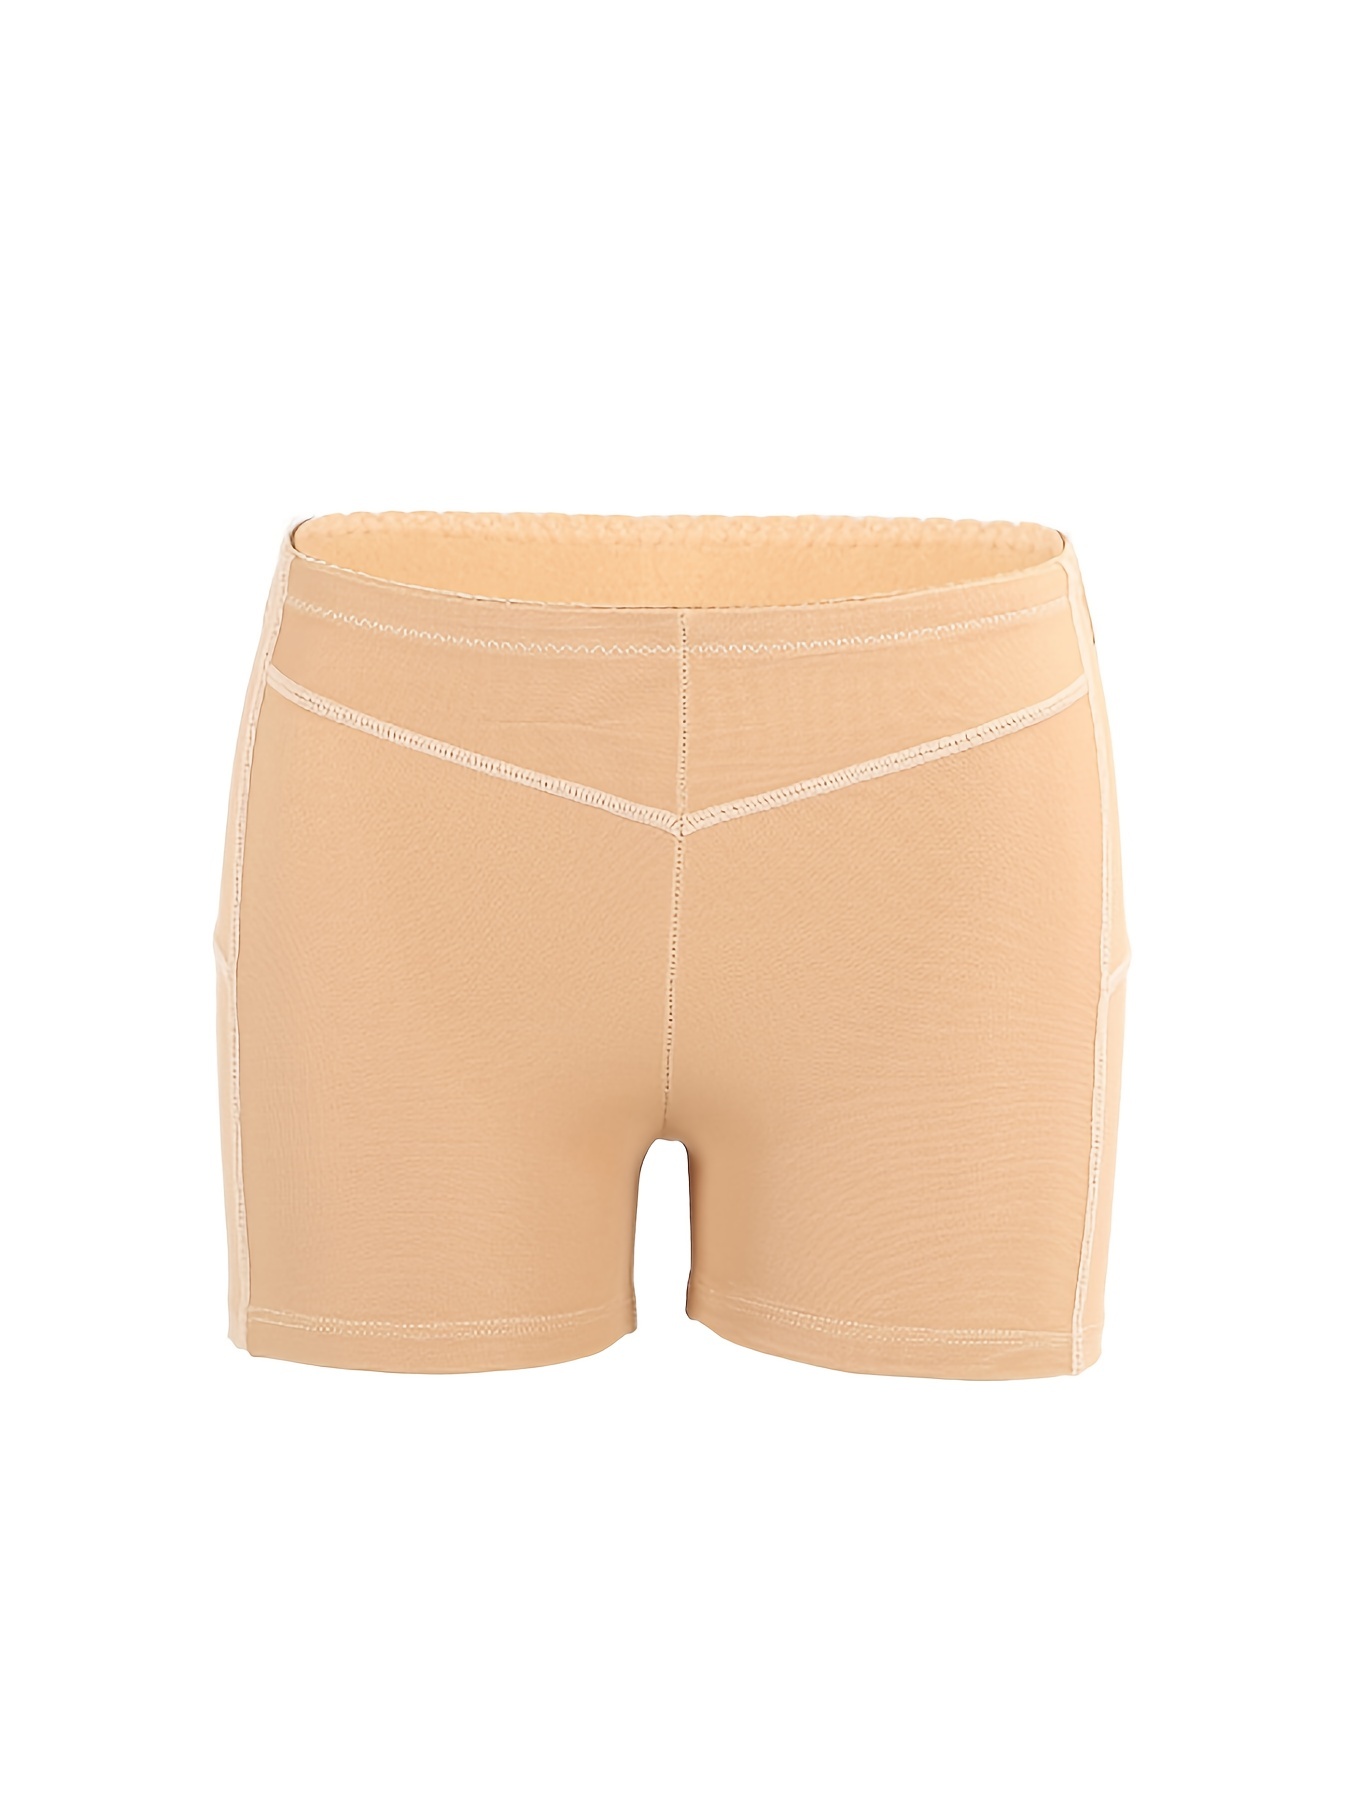 Now You Can Make Your Own Tiny Underwear for Peach Butts